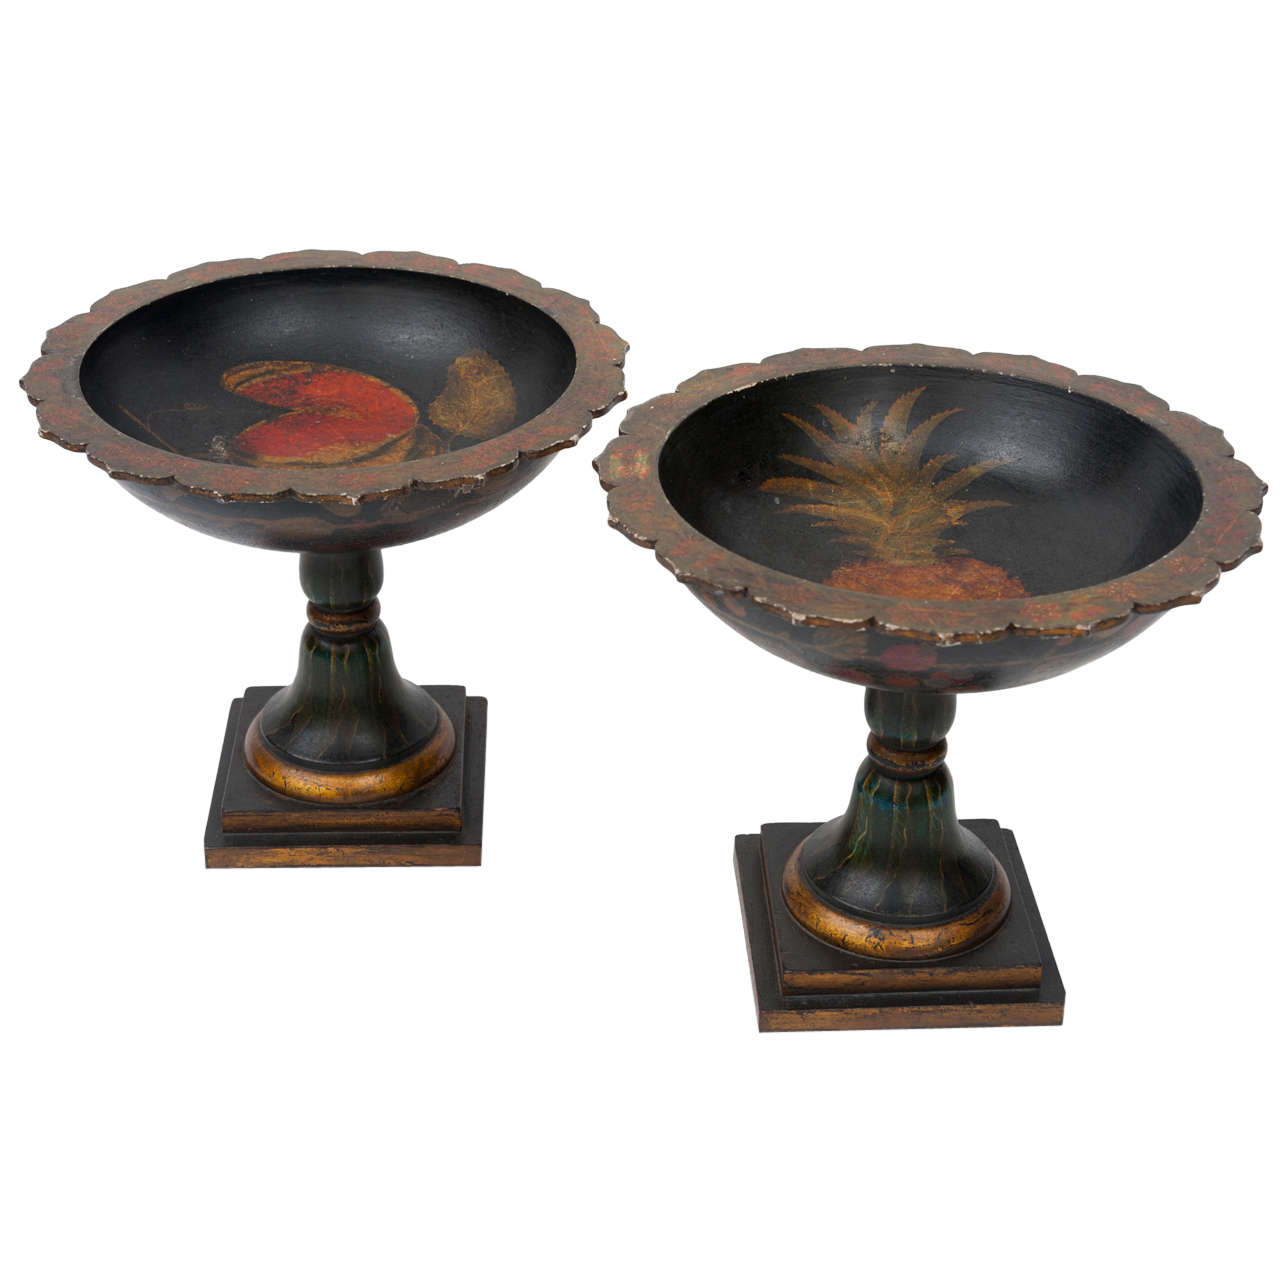 19th Century Pair of French Tazzas or Urns For Sale